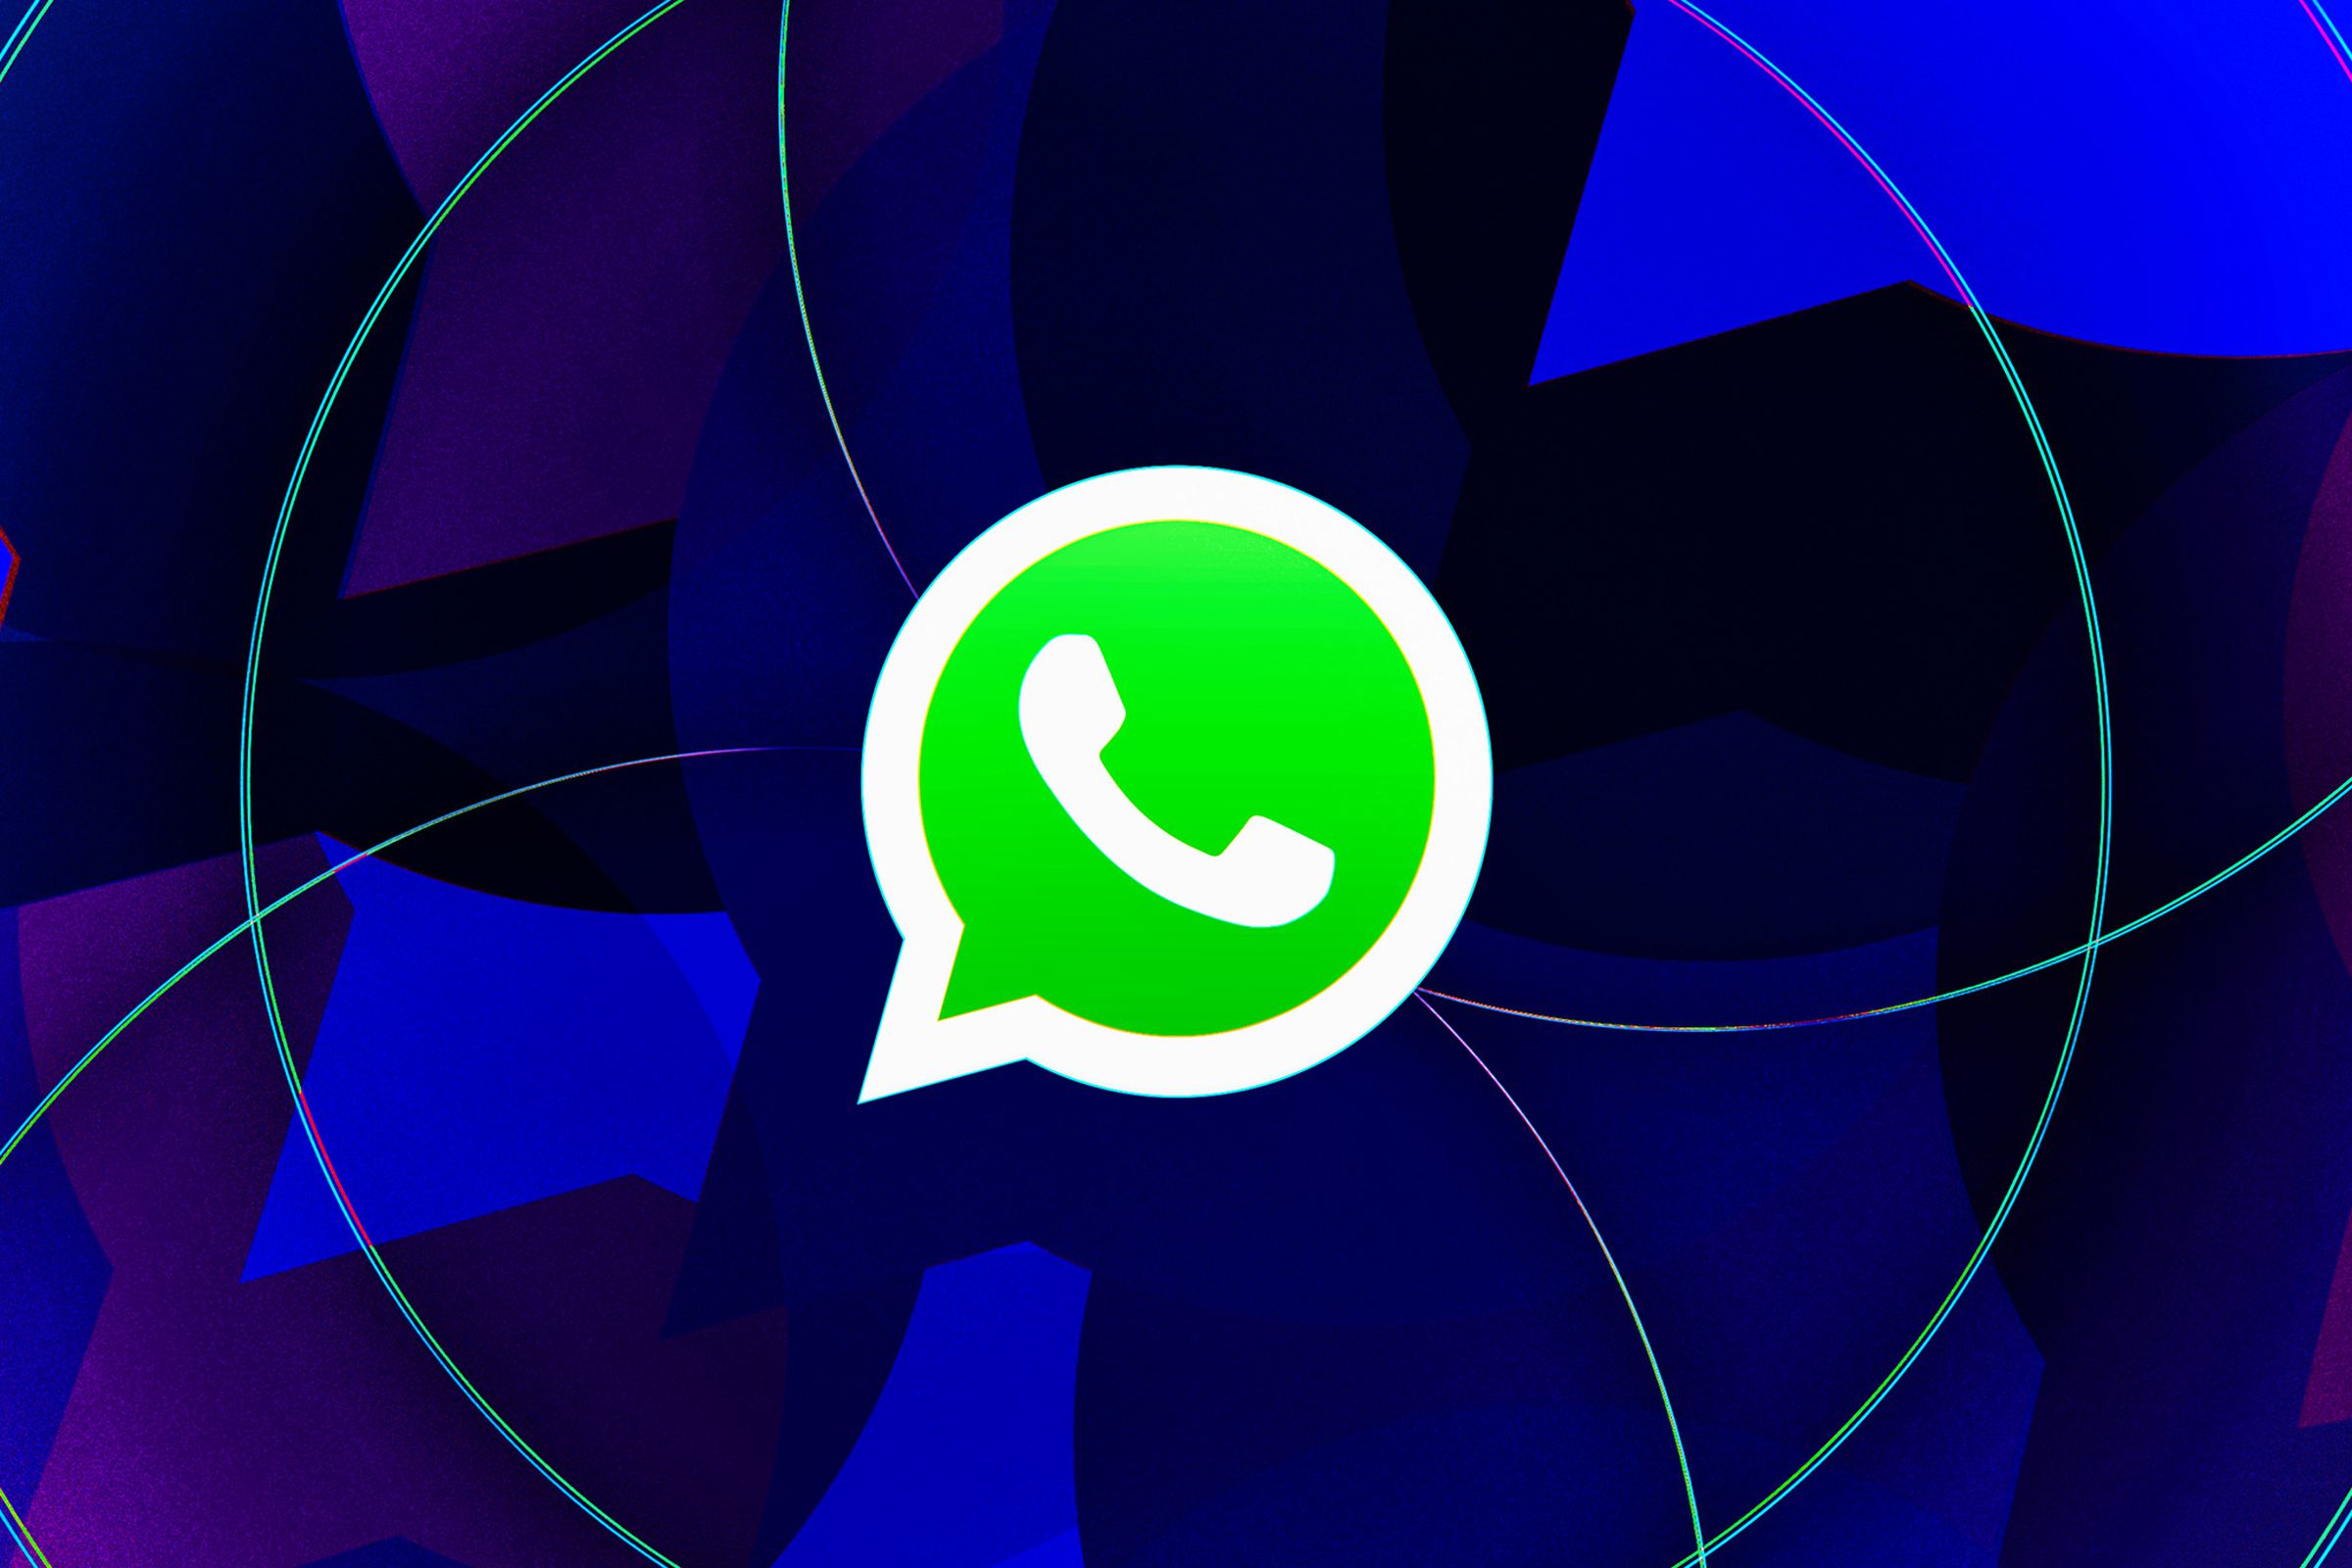 Illustration of the WhatsApp bubble logo on a dark blue background